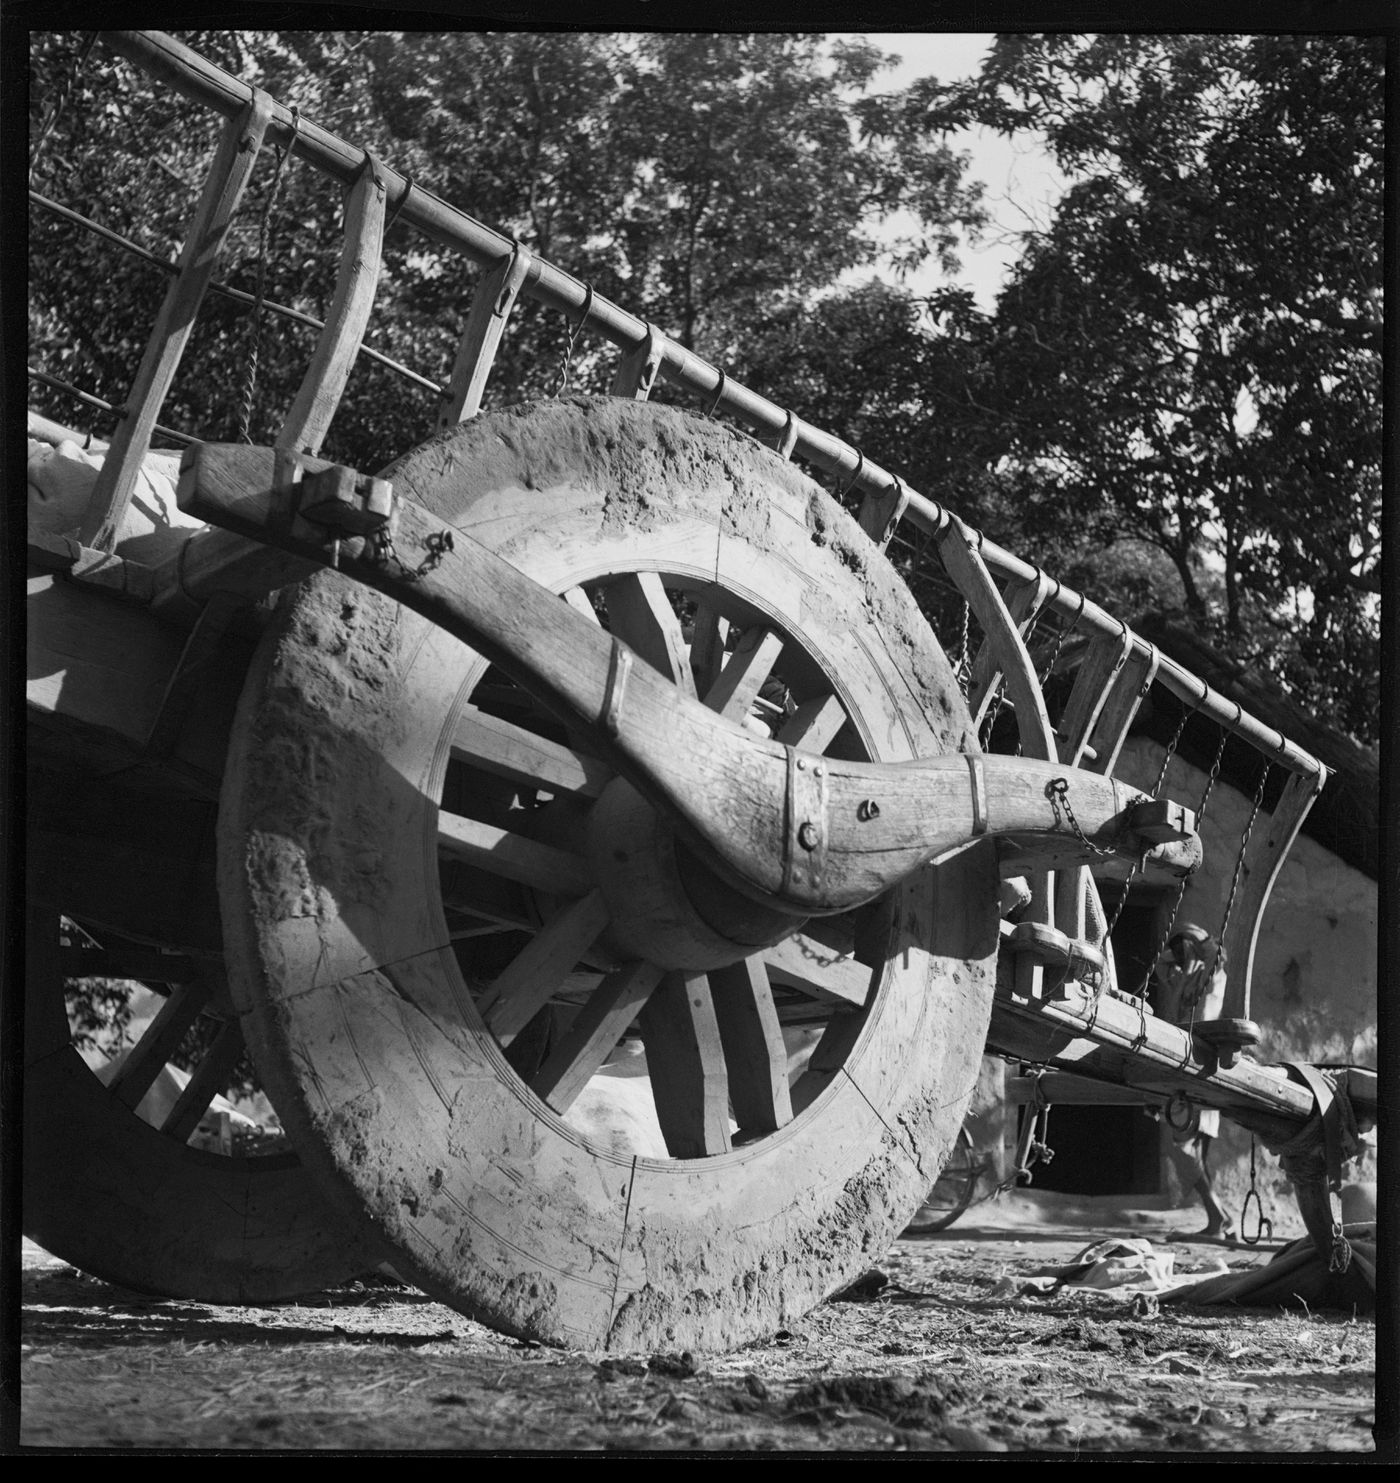 Wheel of a cart in Chandigarh's area before the construction, India